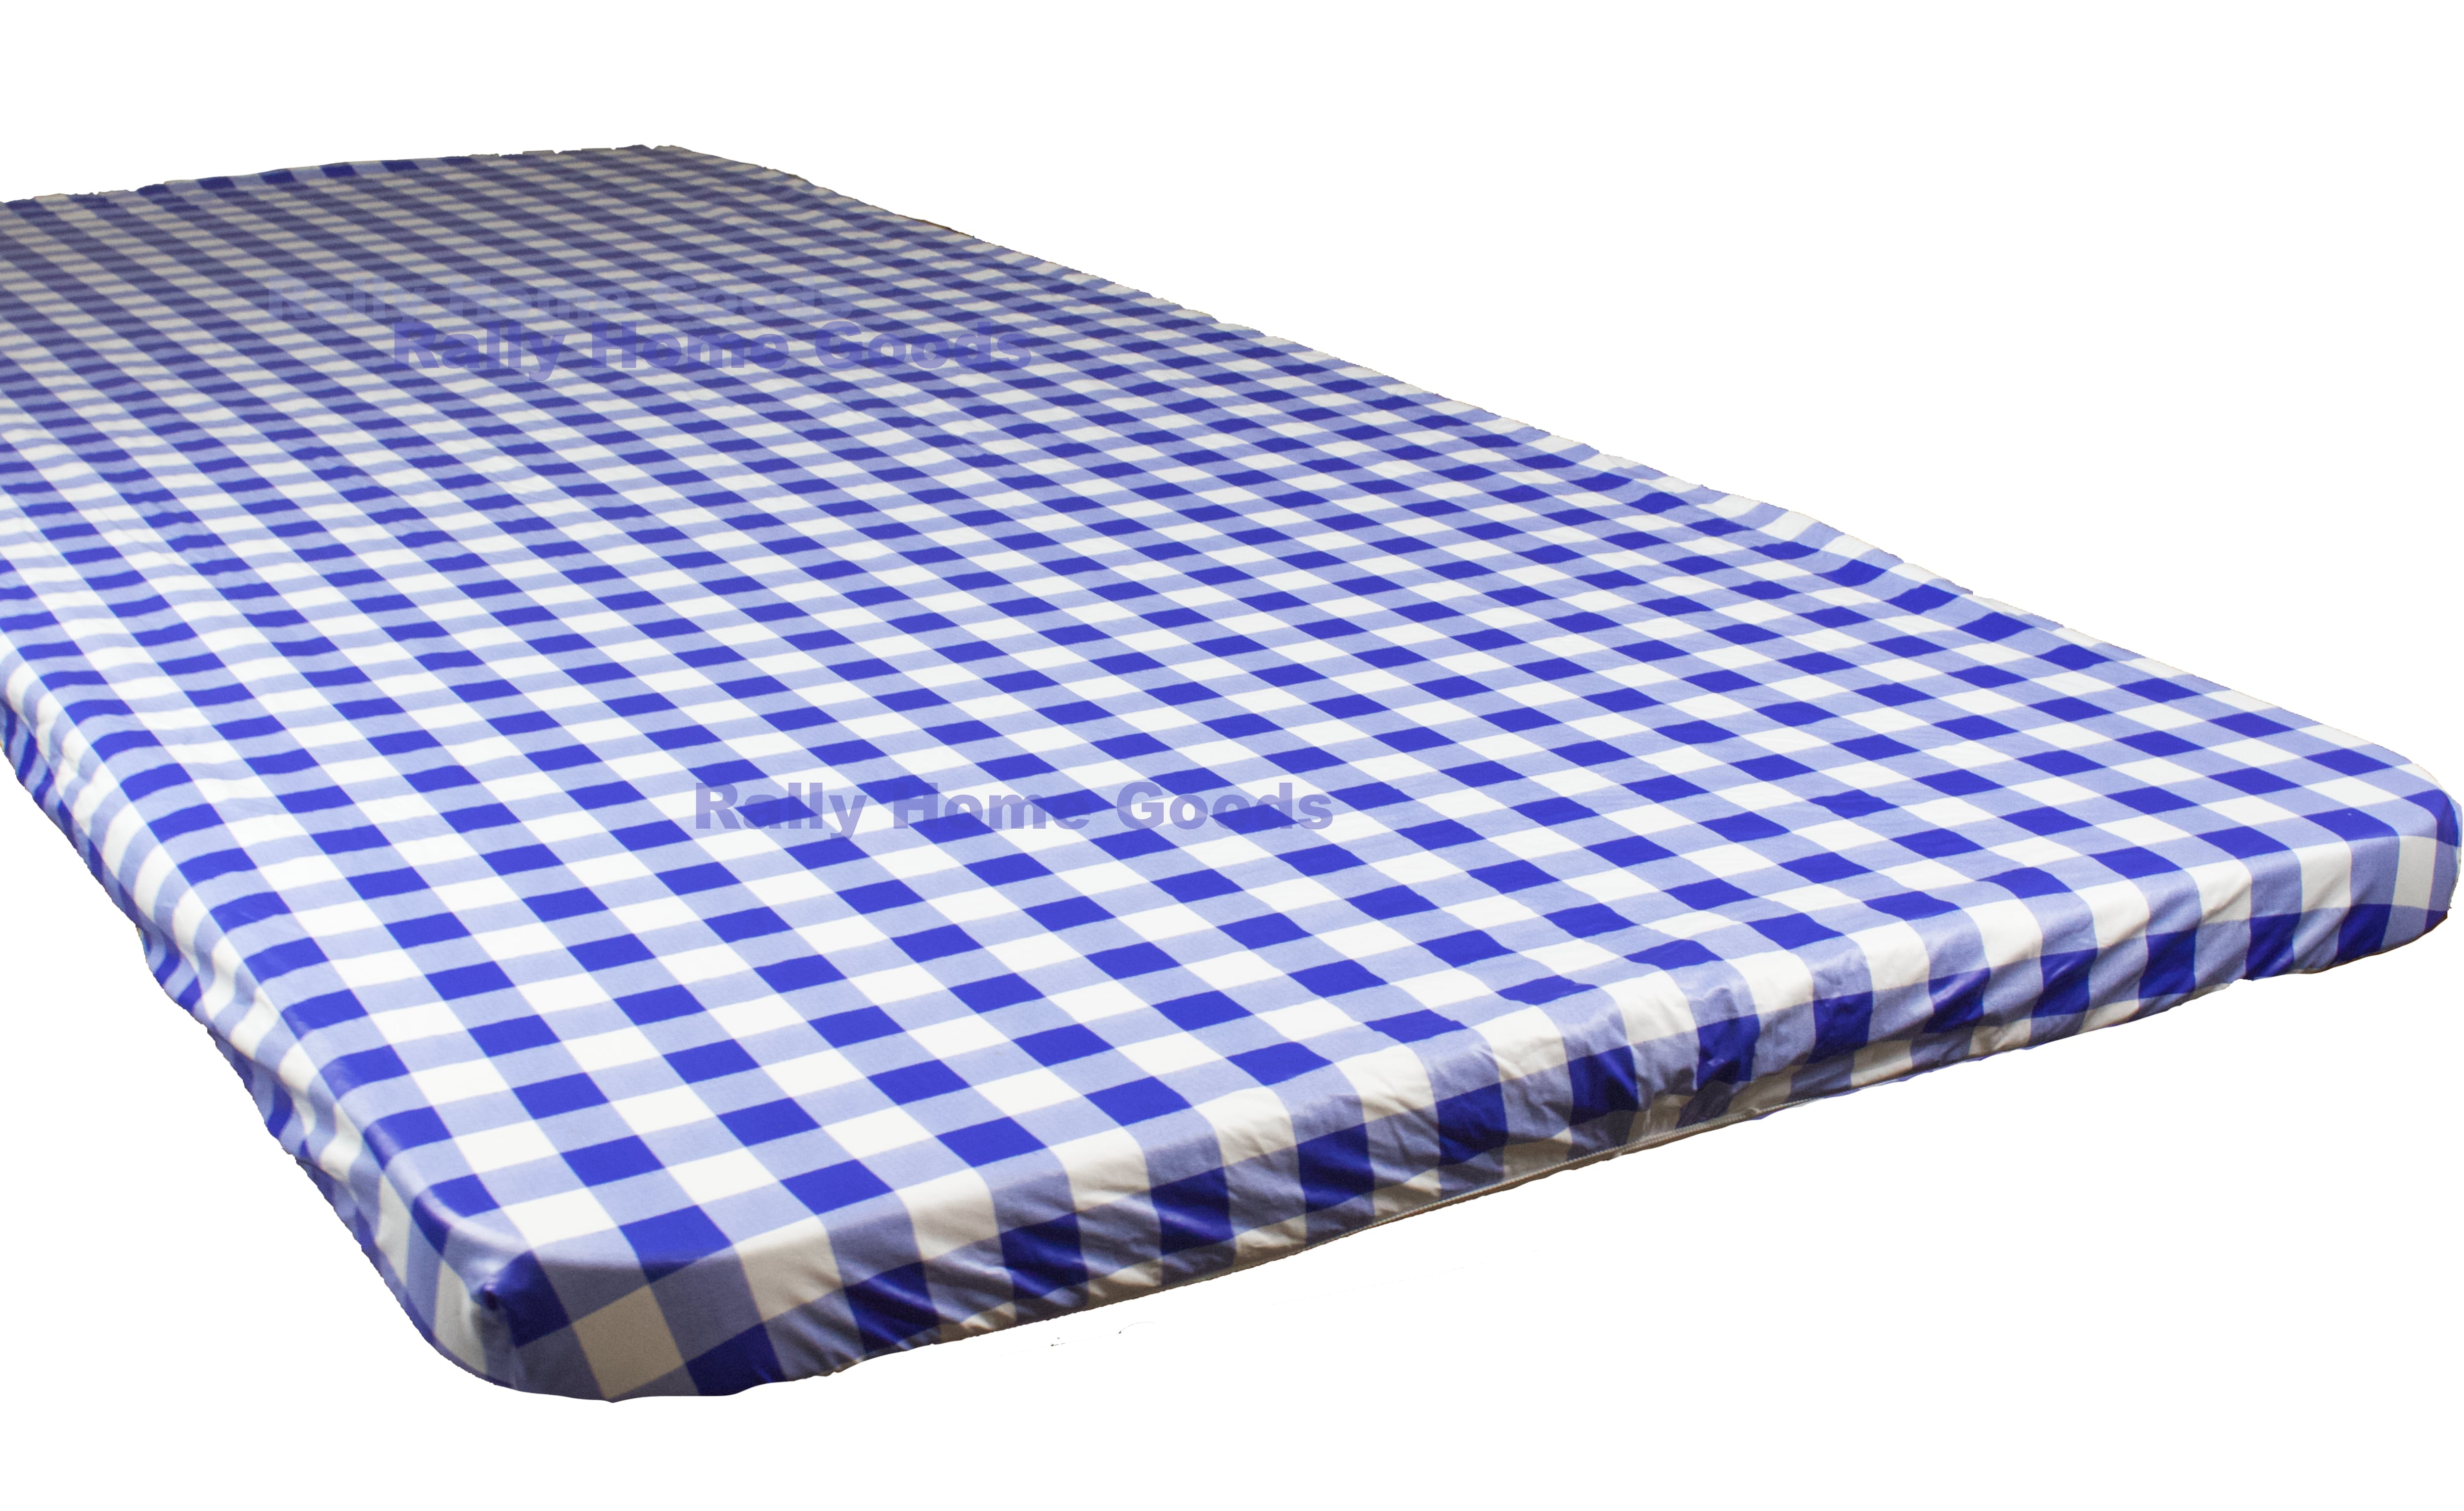 Waterproof Spill-Proof Edged Vinyl Table Cover Gray Checkered Printed with Flannel Baking 6ft Rectangle Elastic Fitted Tablecloth Easy to Wipe Off Stains Great for Picnic Party Outdoor Patio 